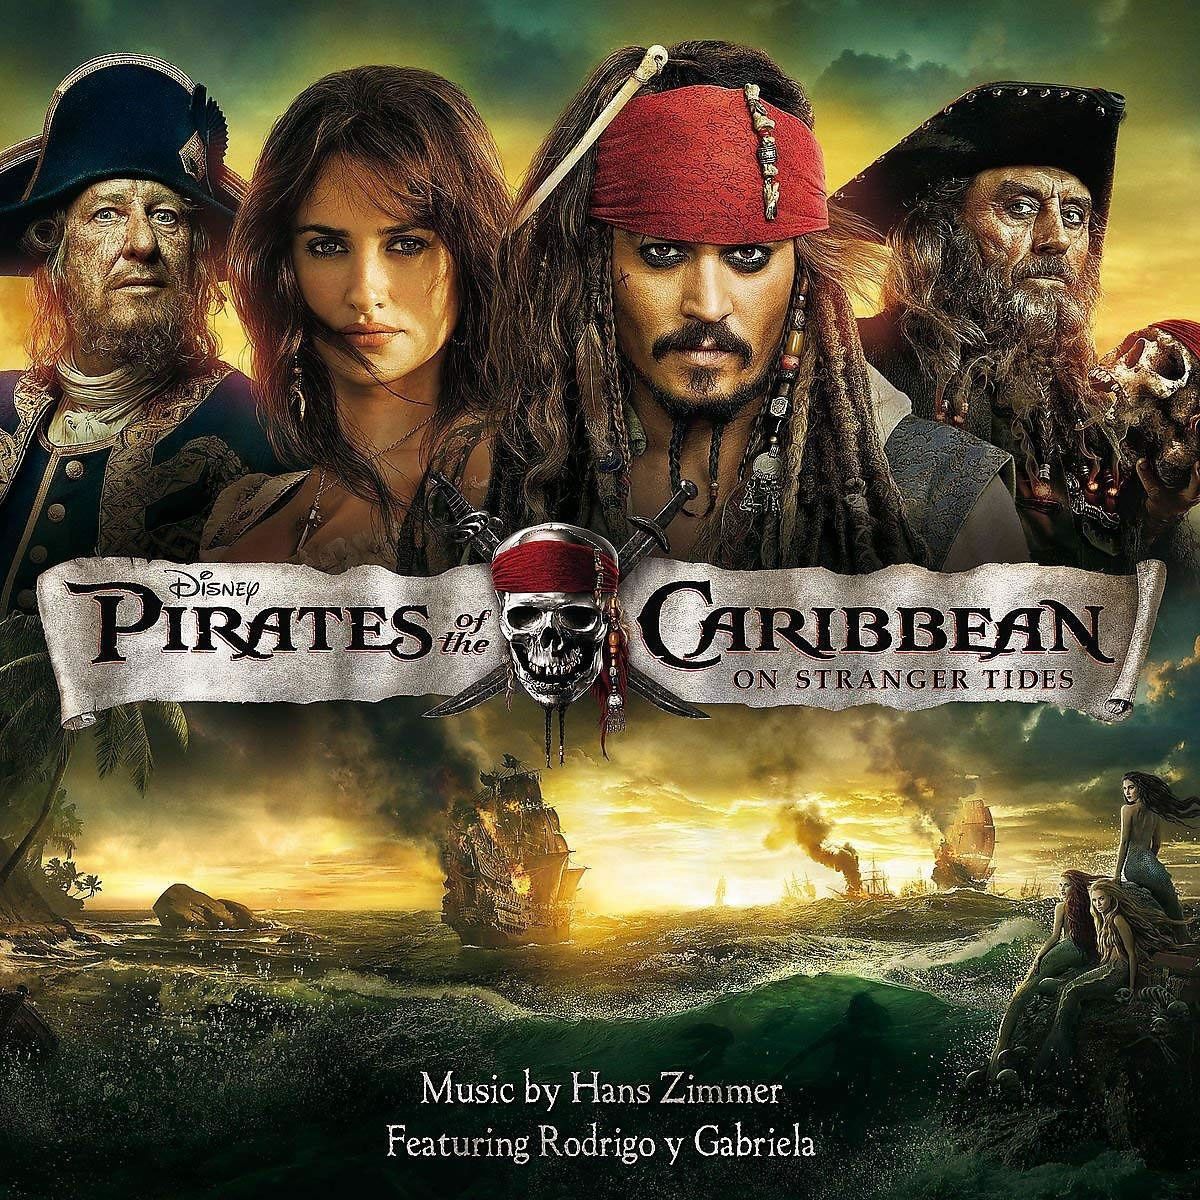 Pirates of the caribbean 4 full movie youtube